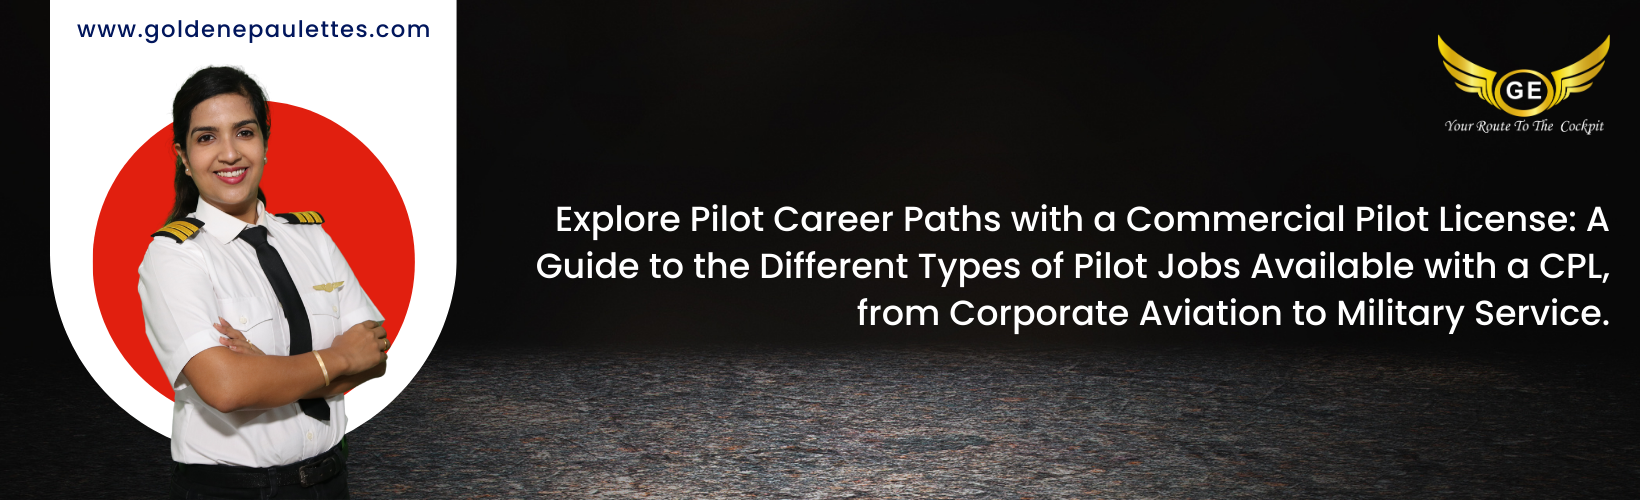 Exploring Different Pilot Career Paths with a Commercial Pilot License